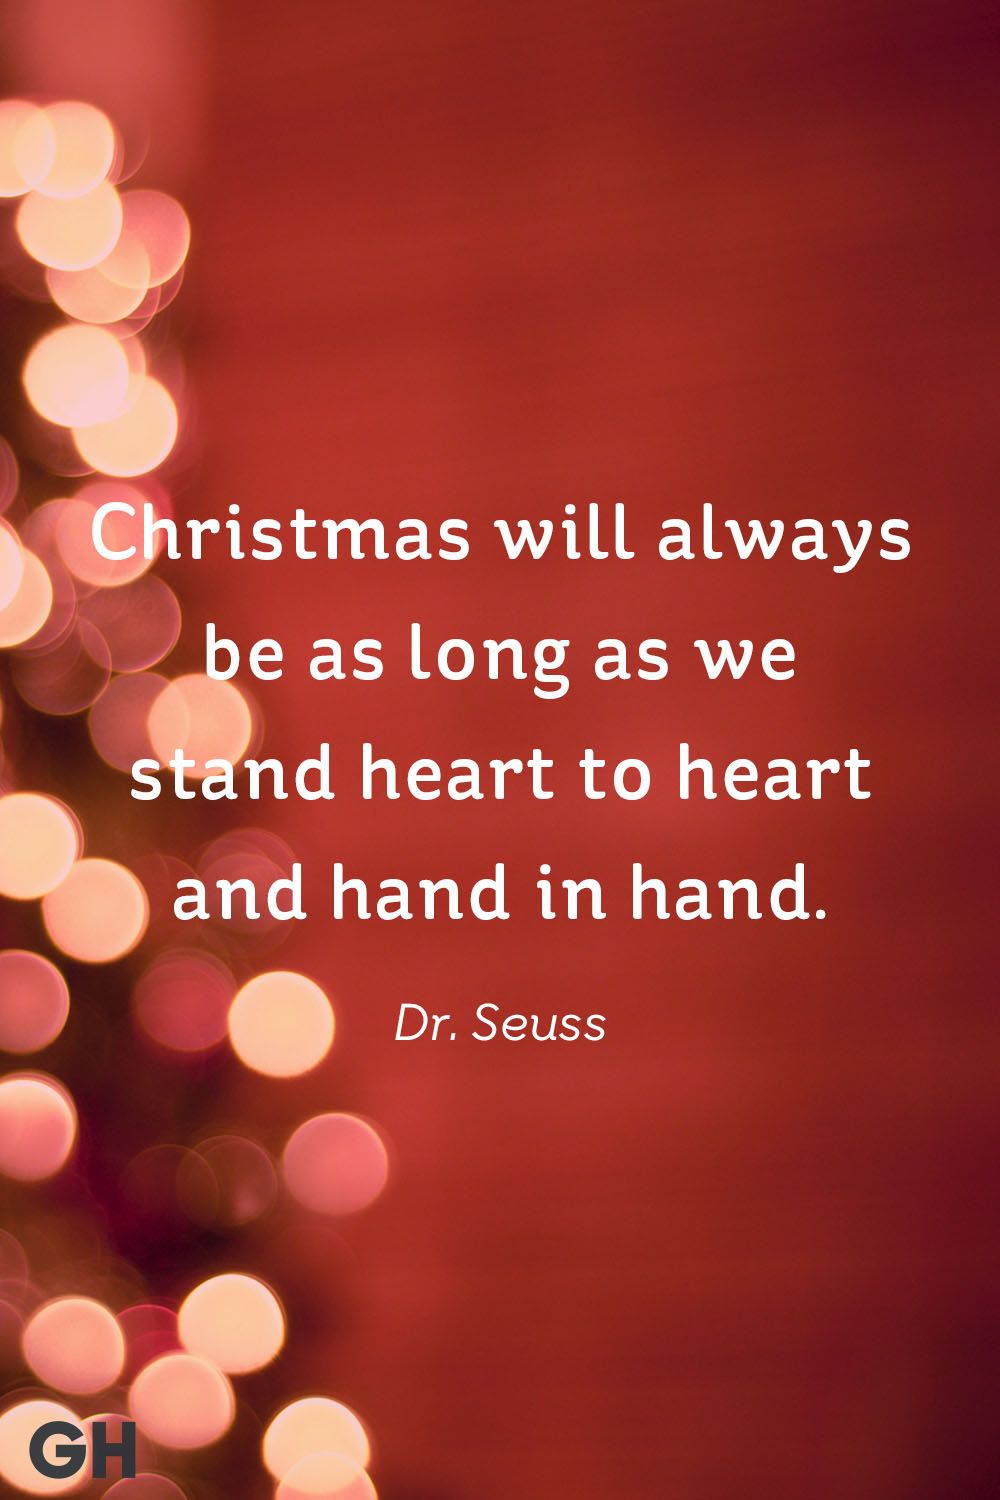 christmas quotes red